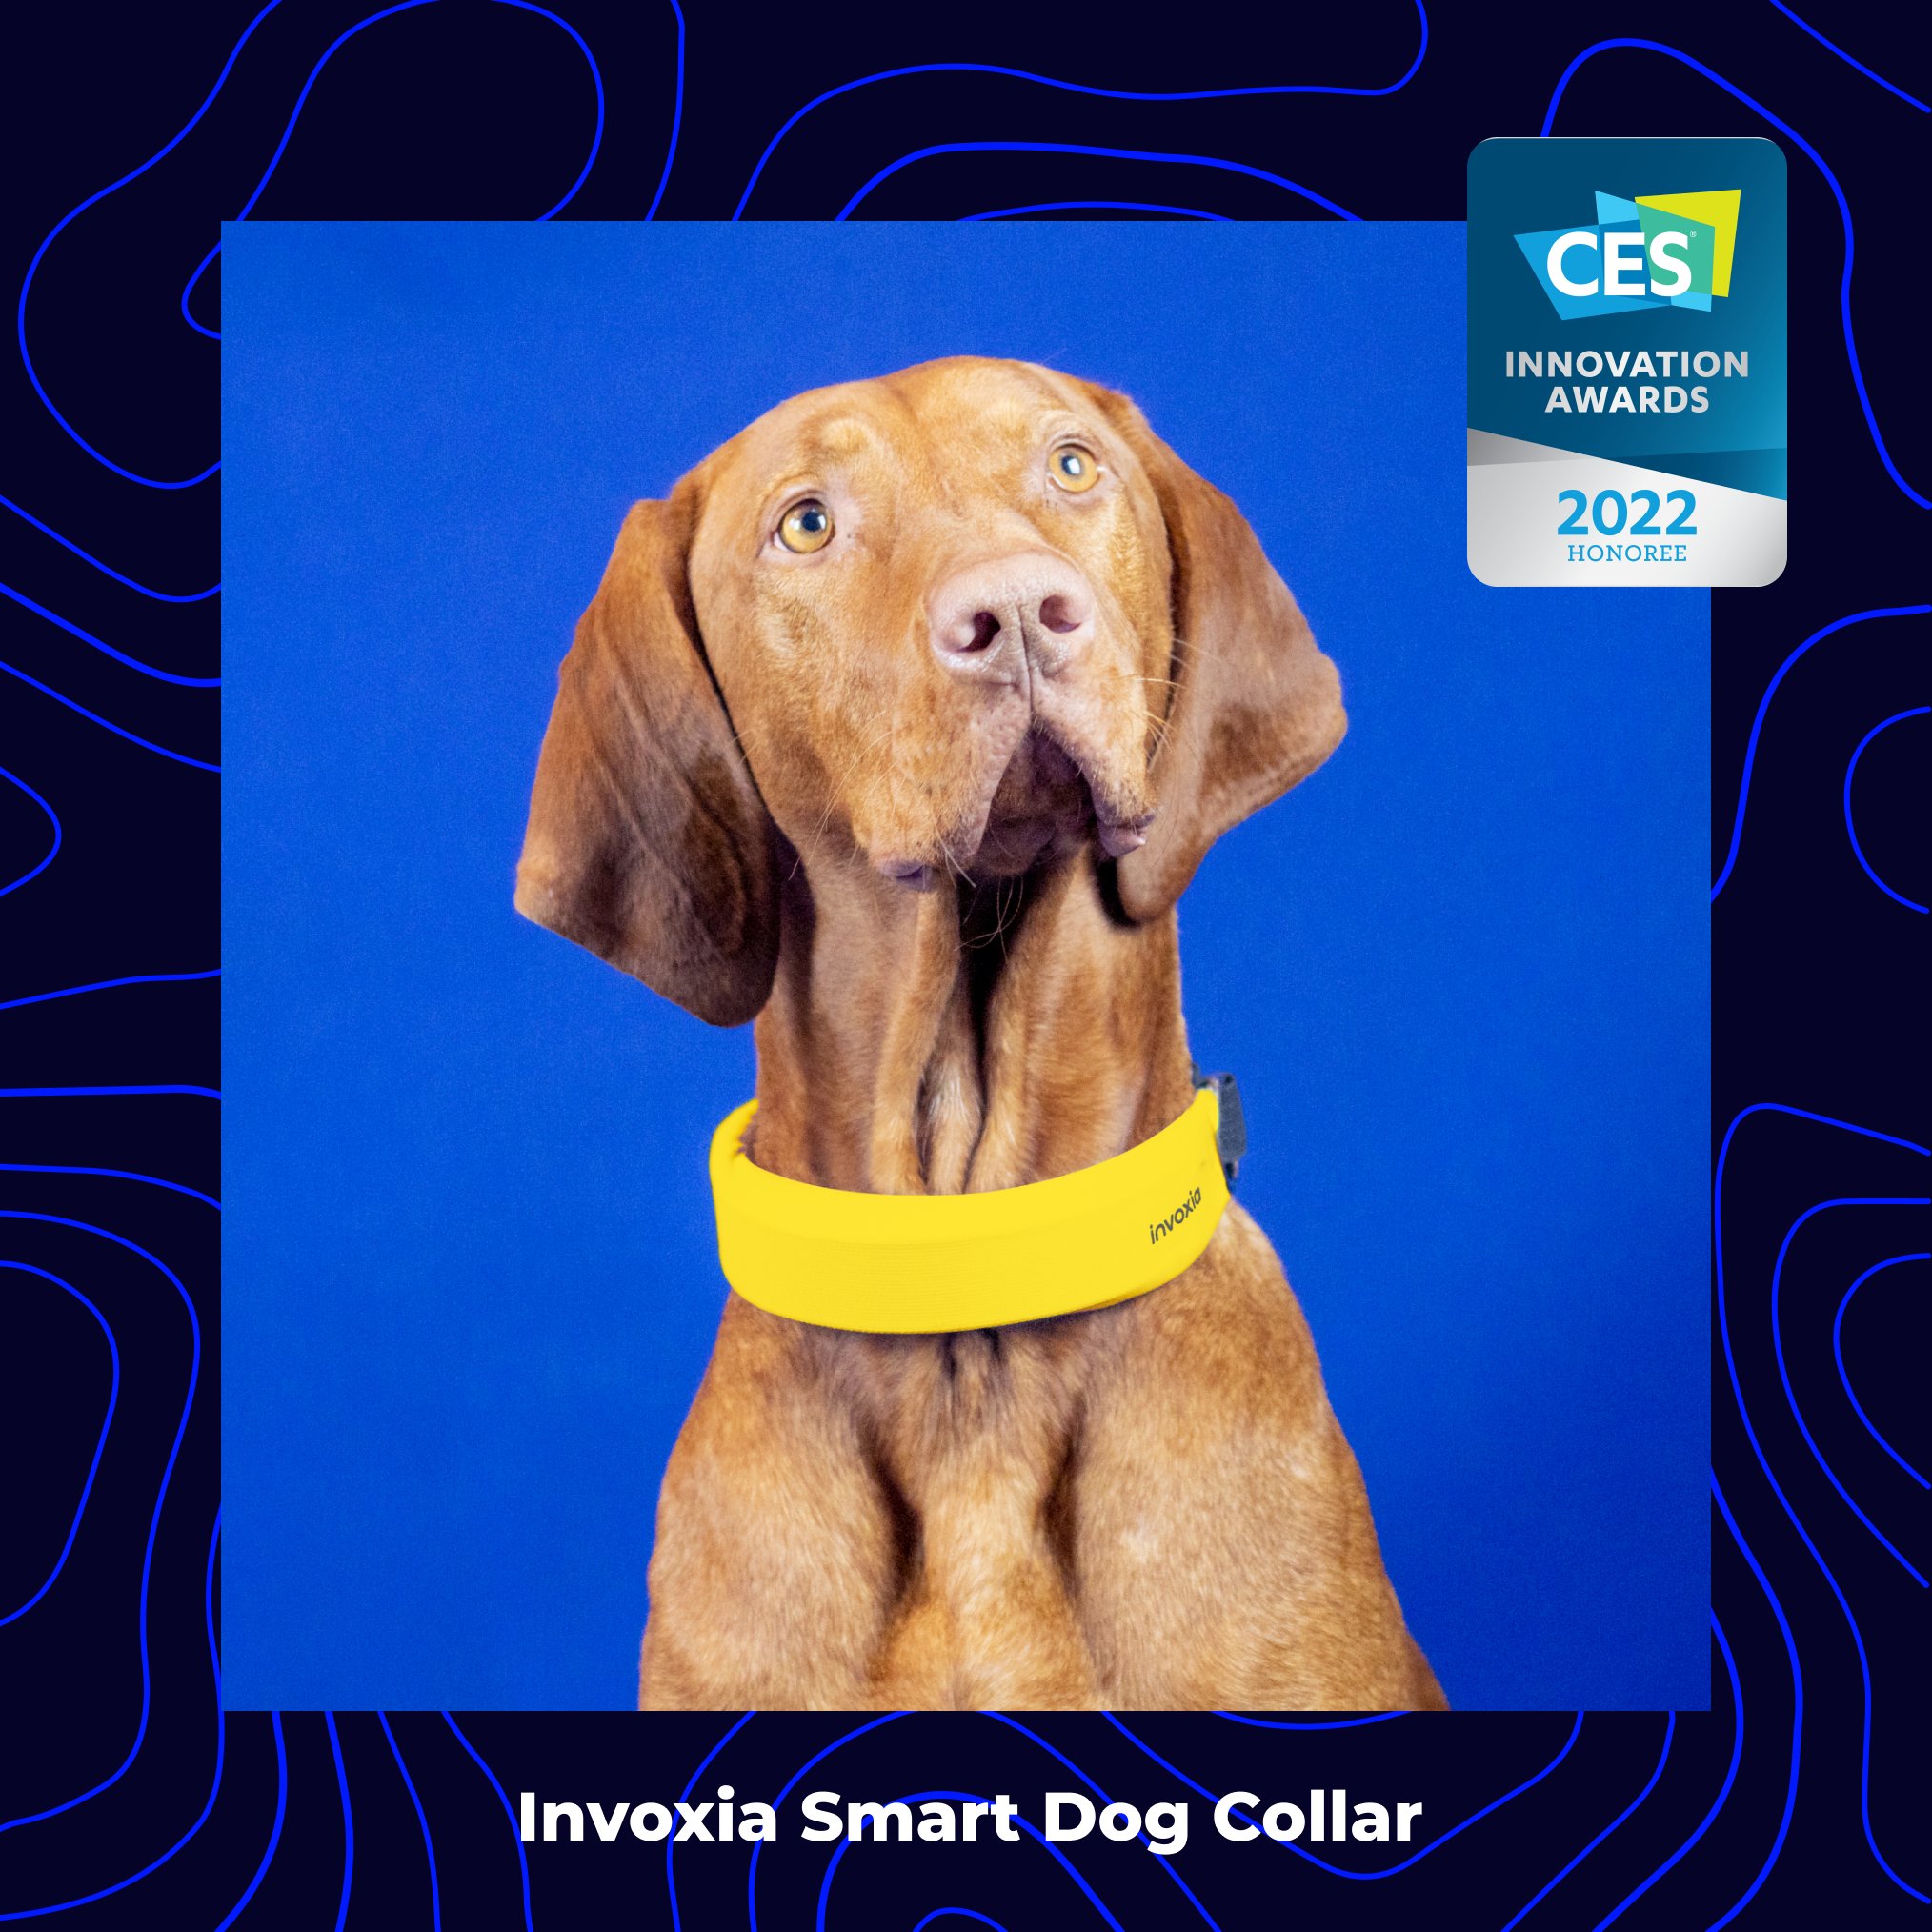 invoxia's smart dog collar lets you track your pet's vitals